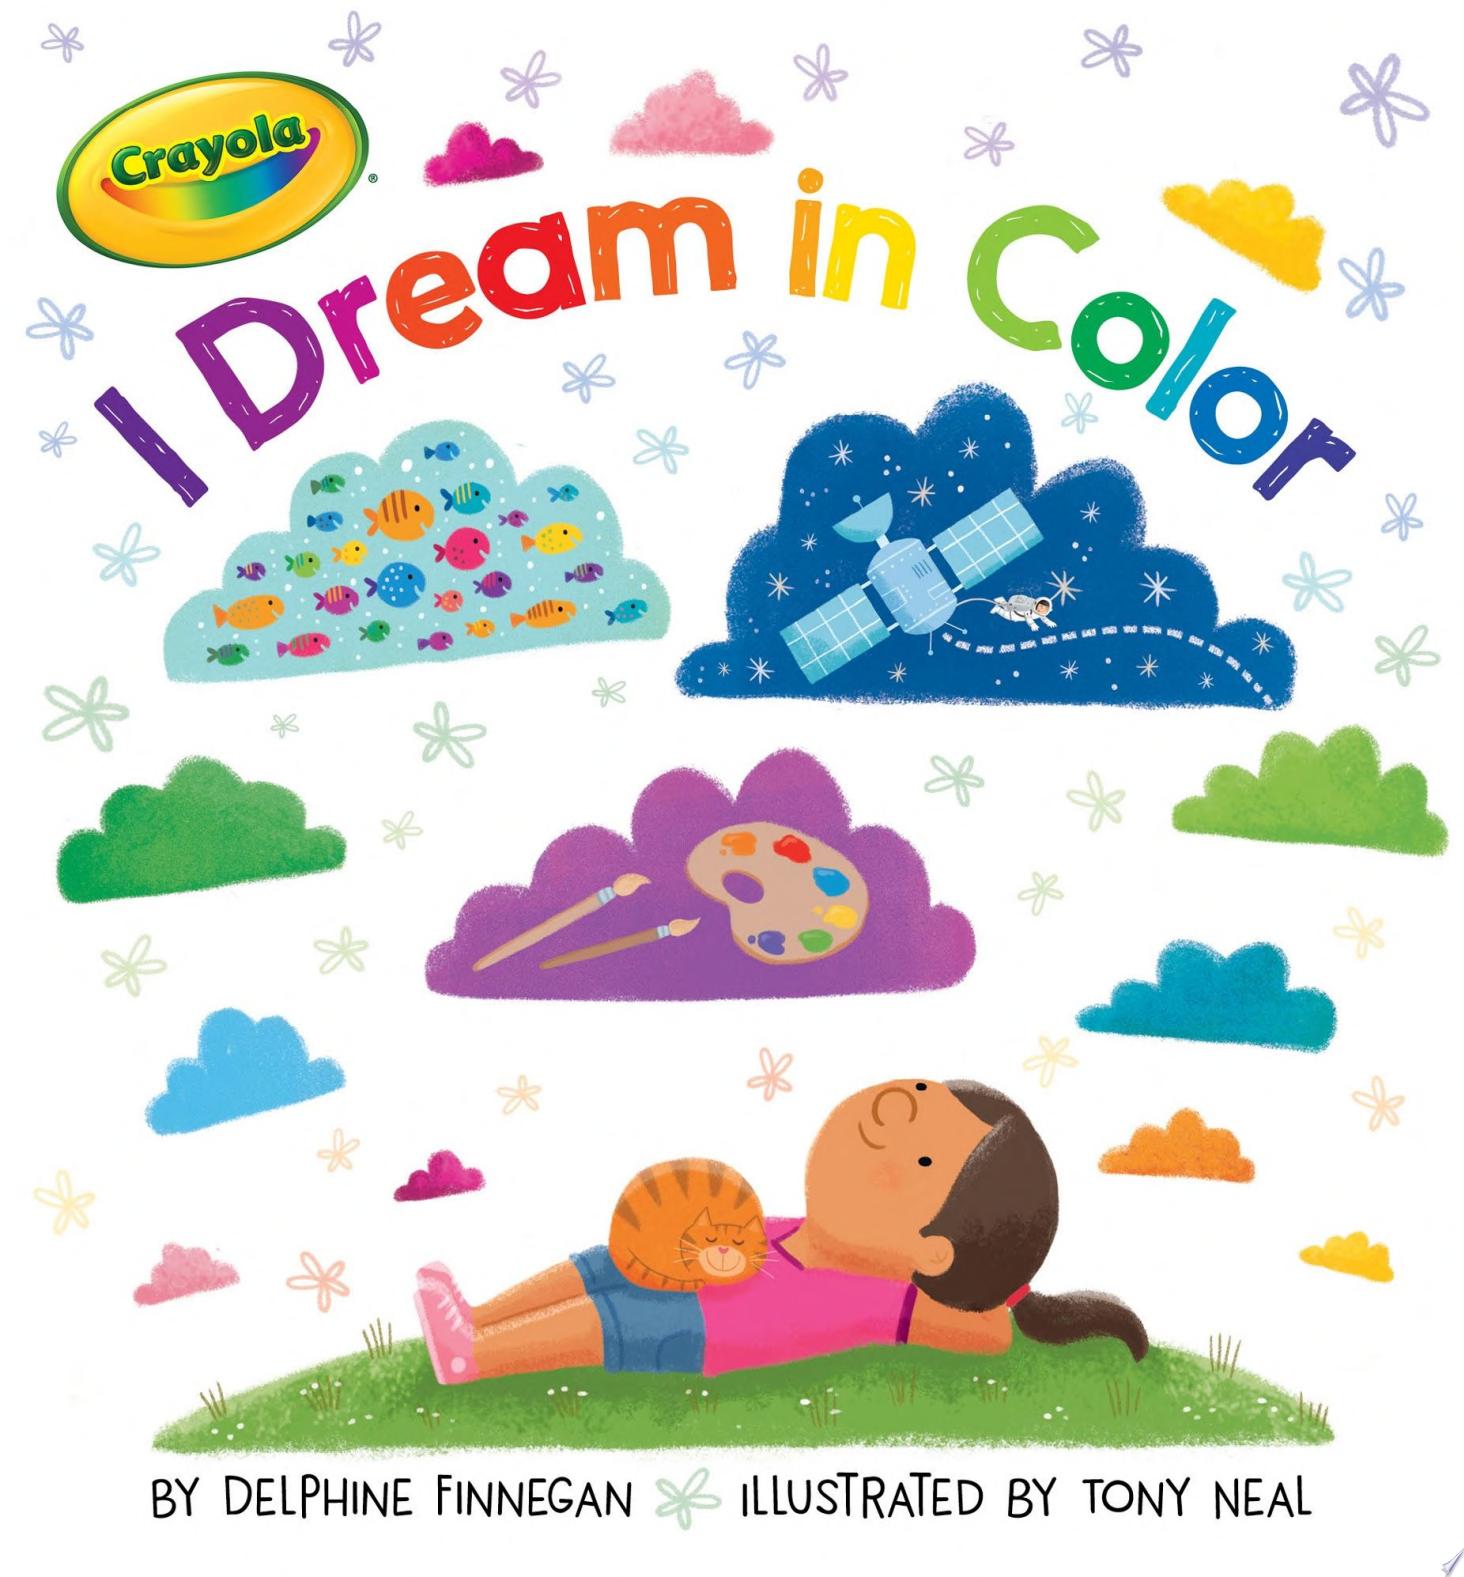 Image for "I Dream in Color"